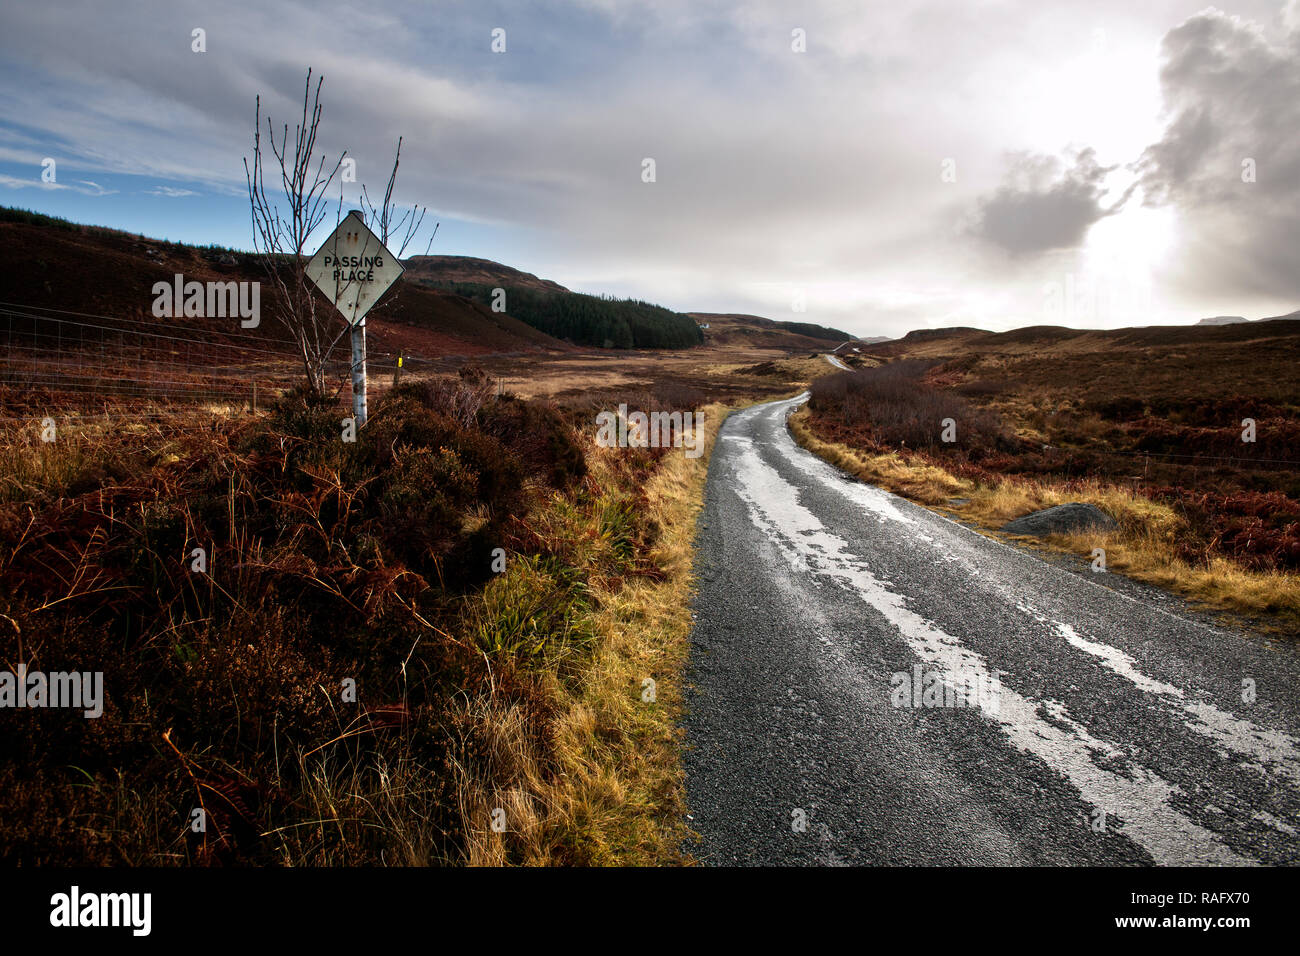 deserted desolate winding roads with snow and ice disappearing into the distance Stock Photo